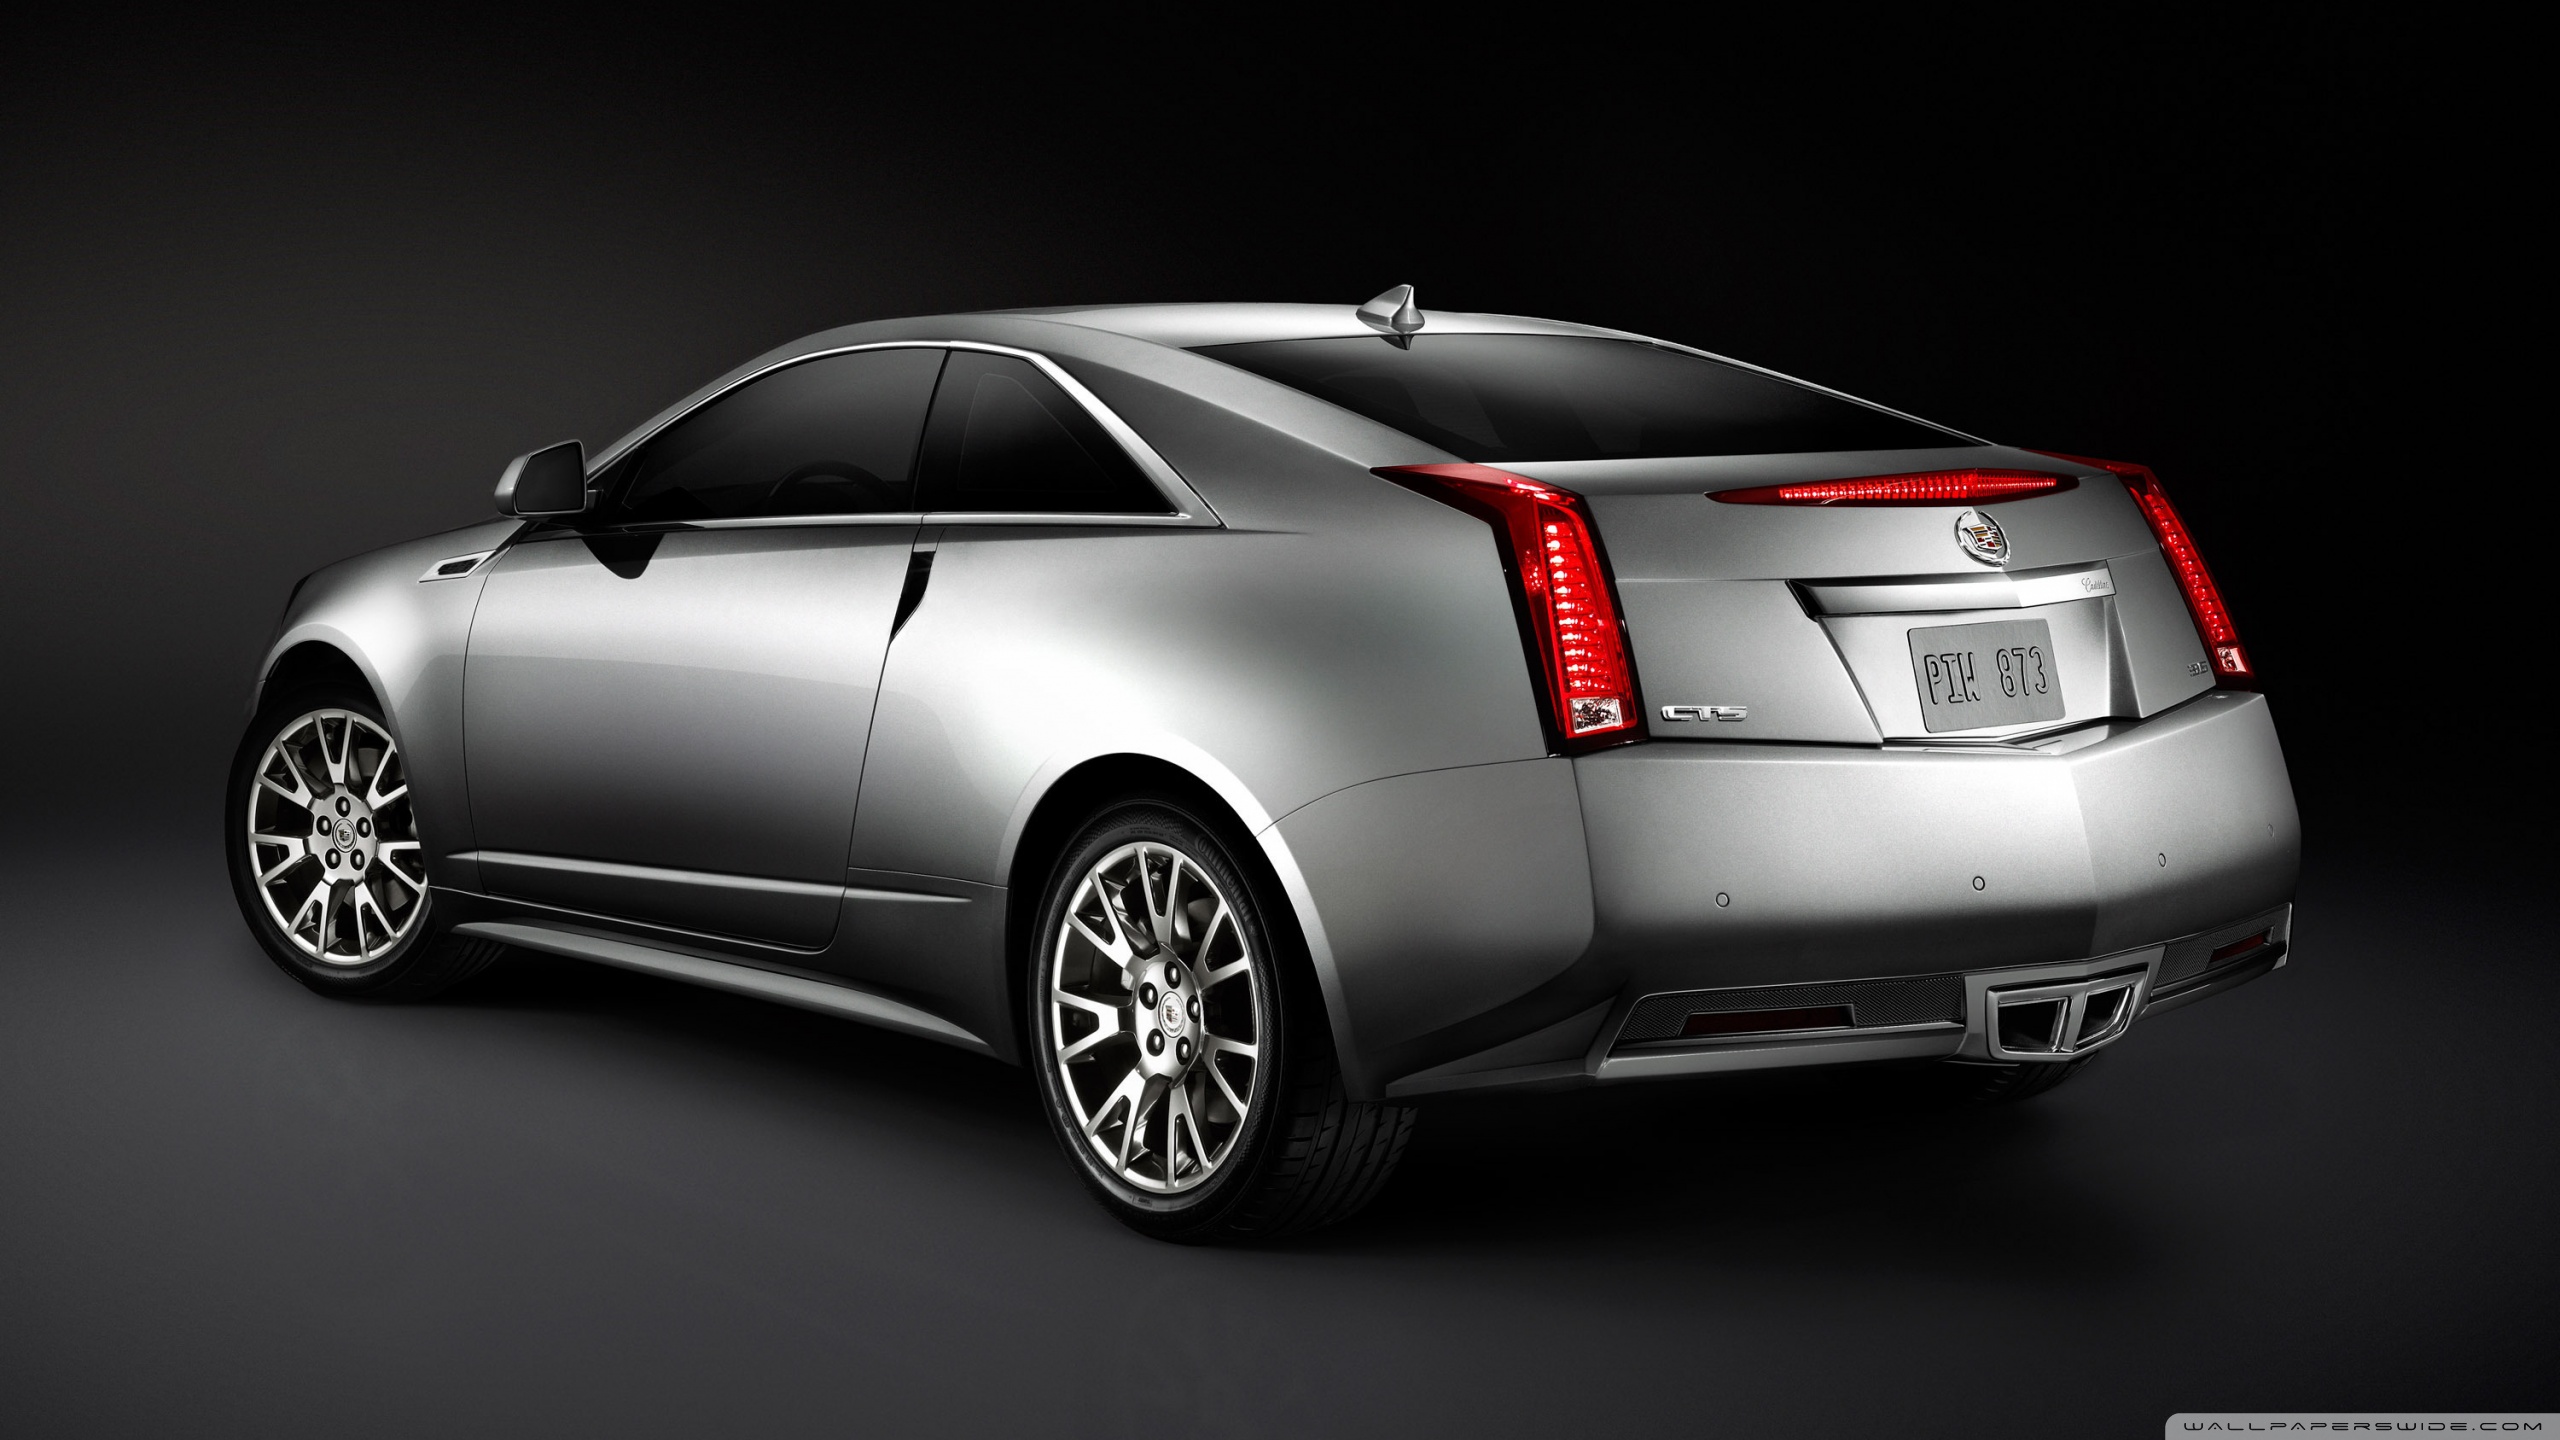 Cadillac Cts Coupe Silver Ultra Hd Desktop Background Wallpaper For 4k Uhd Tv Widescreen Ultrawide Desktop Laptop Multi Display Dual Monitor Tablet Smartphone